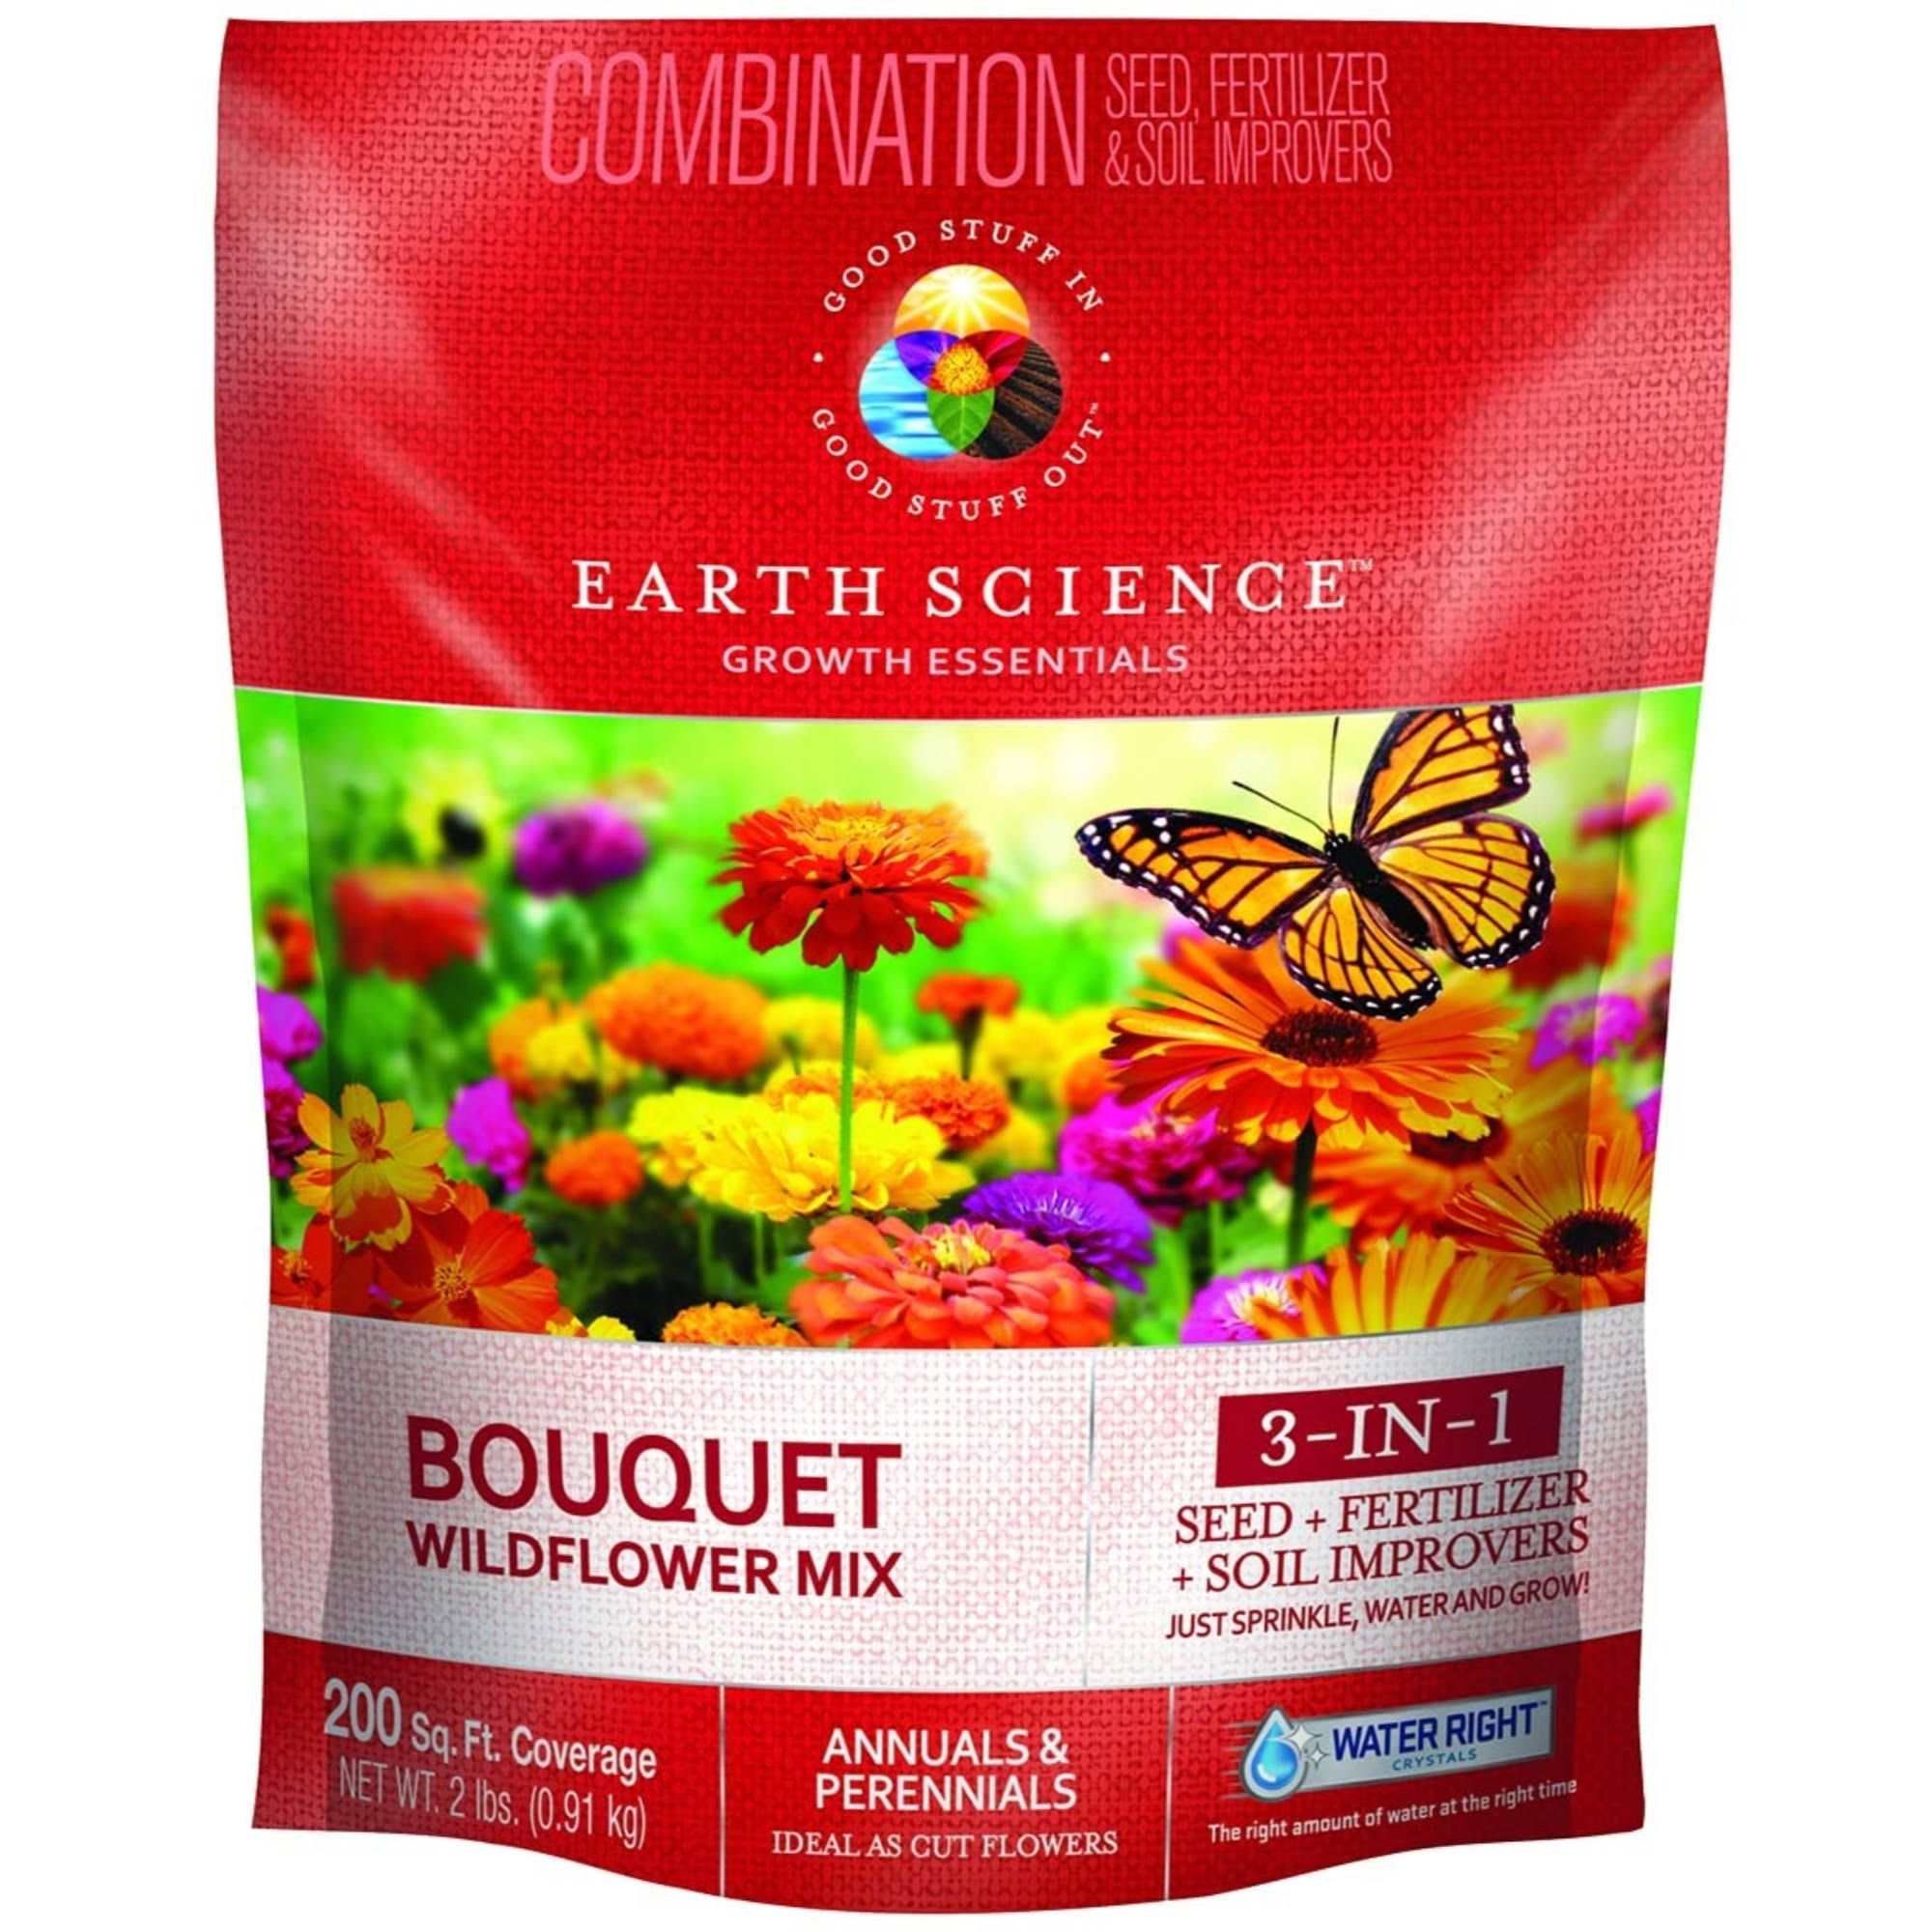 Earth Science Bouquet Wildflower Mix Covers 200 Sq. Ft. 2-Lbs. 12139-6